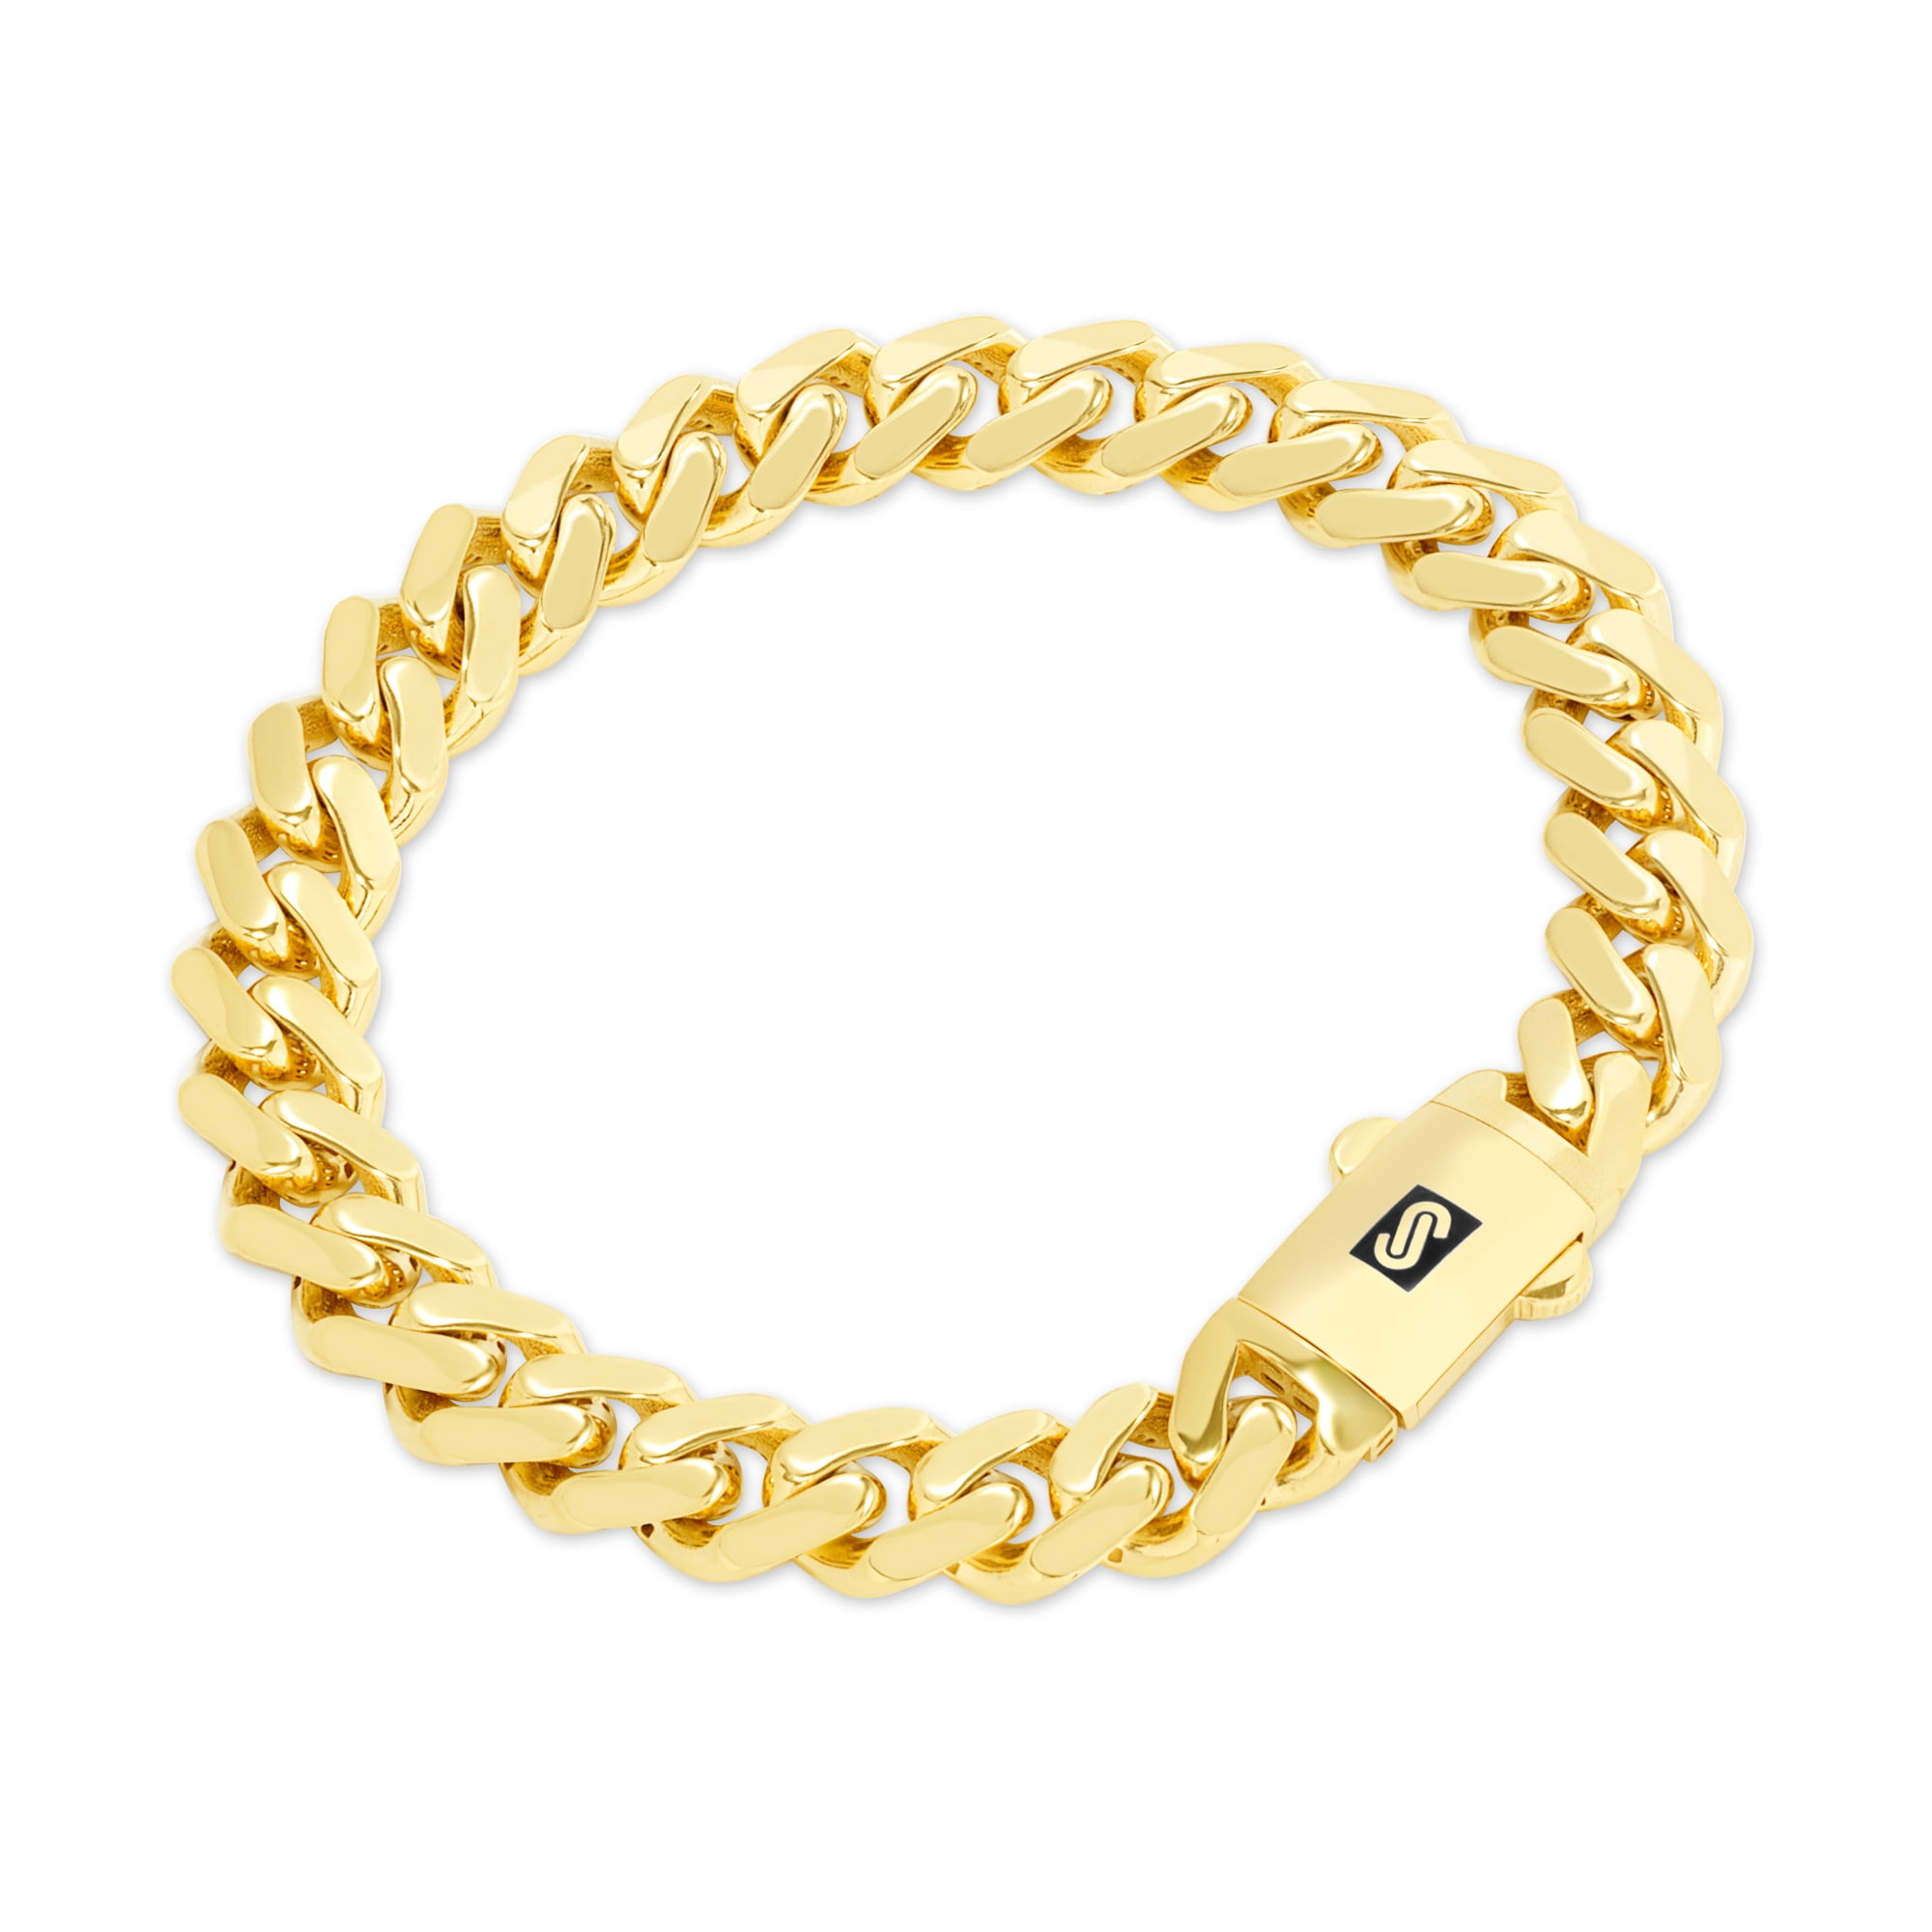 7.5mm with Secure Lobster Lock Clasp Solid 14k Yellow Gold Medical Soft Diamond-Shape Red Enamel Figaro ID Bracelet